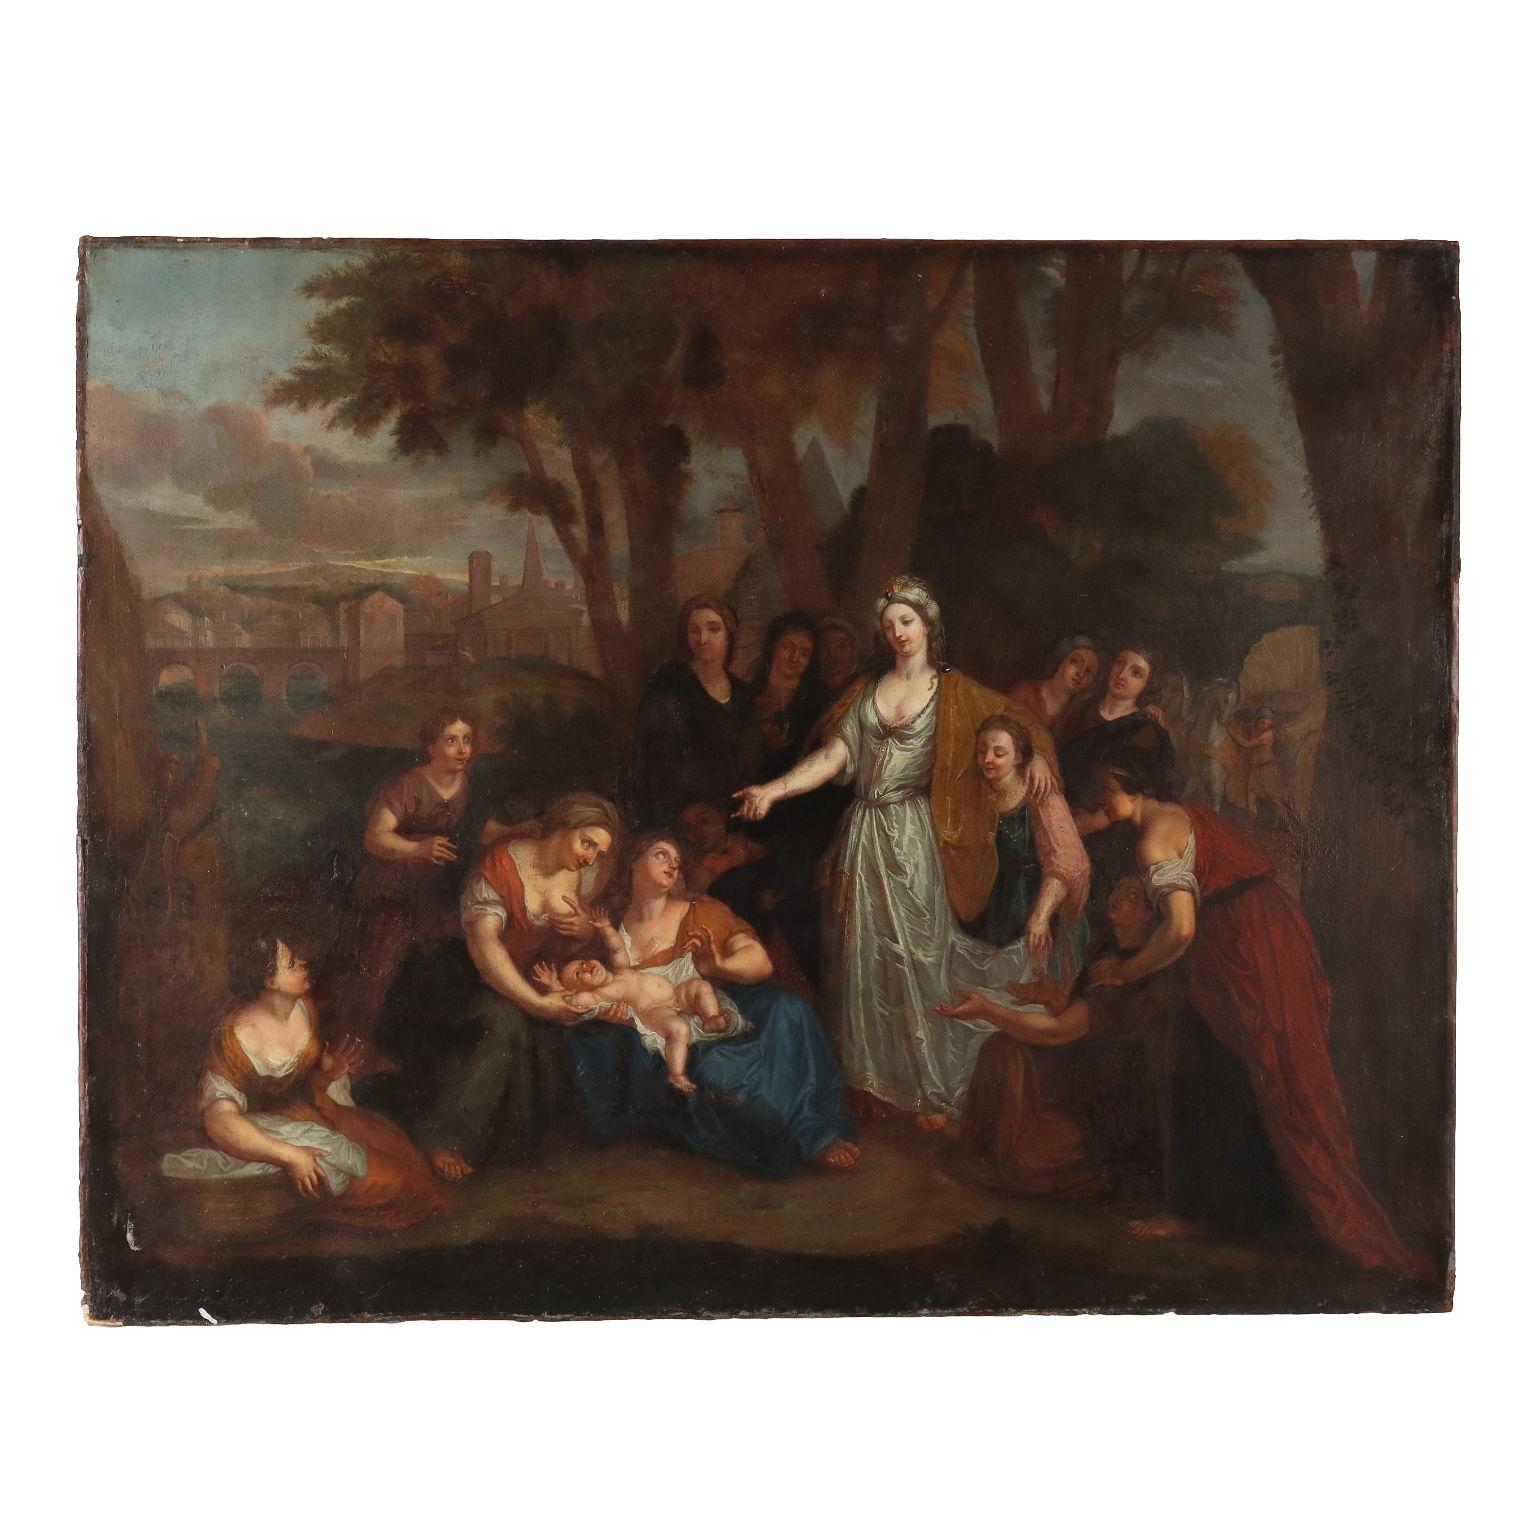 Unknown Figurative Painting - Painting The Finding of Moses 18th century